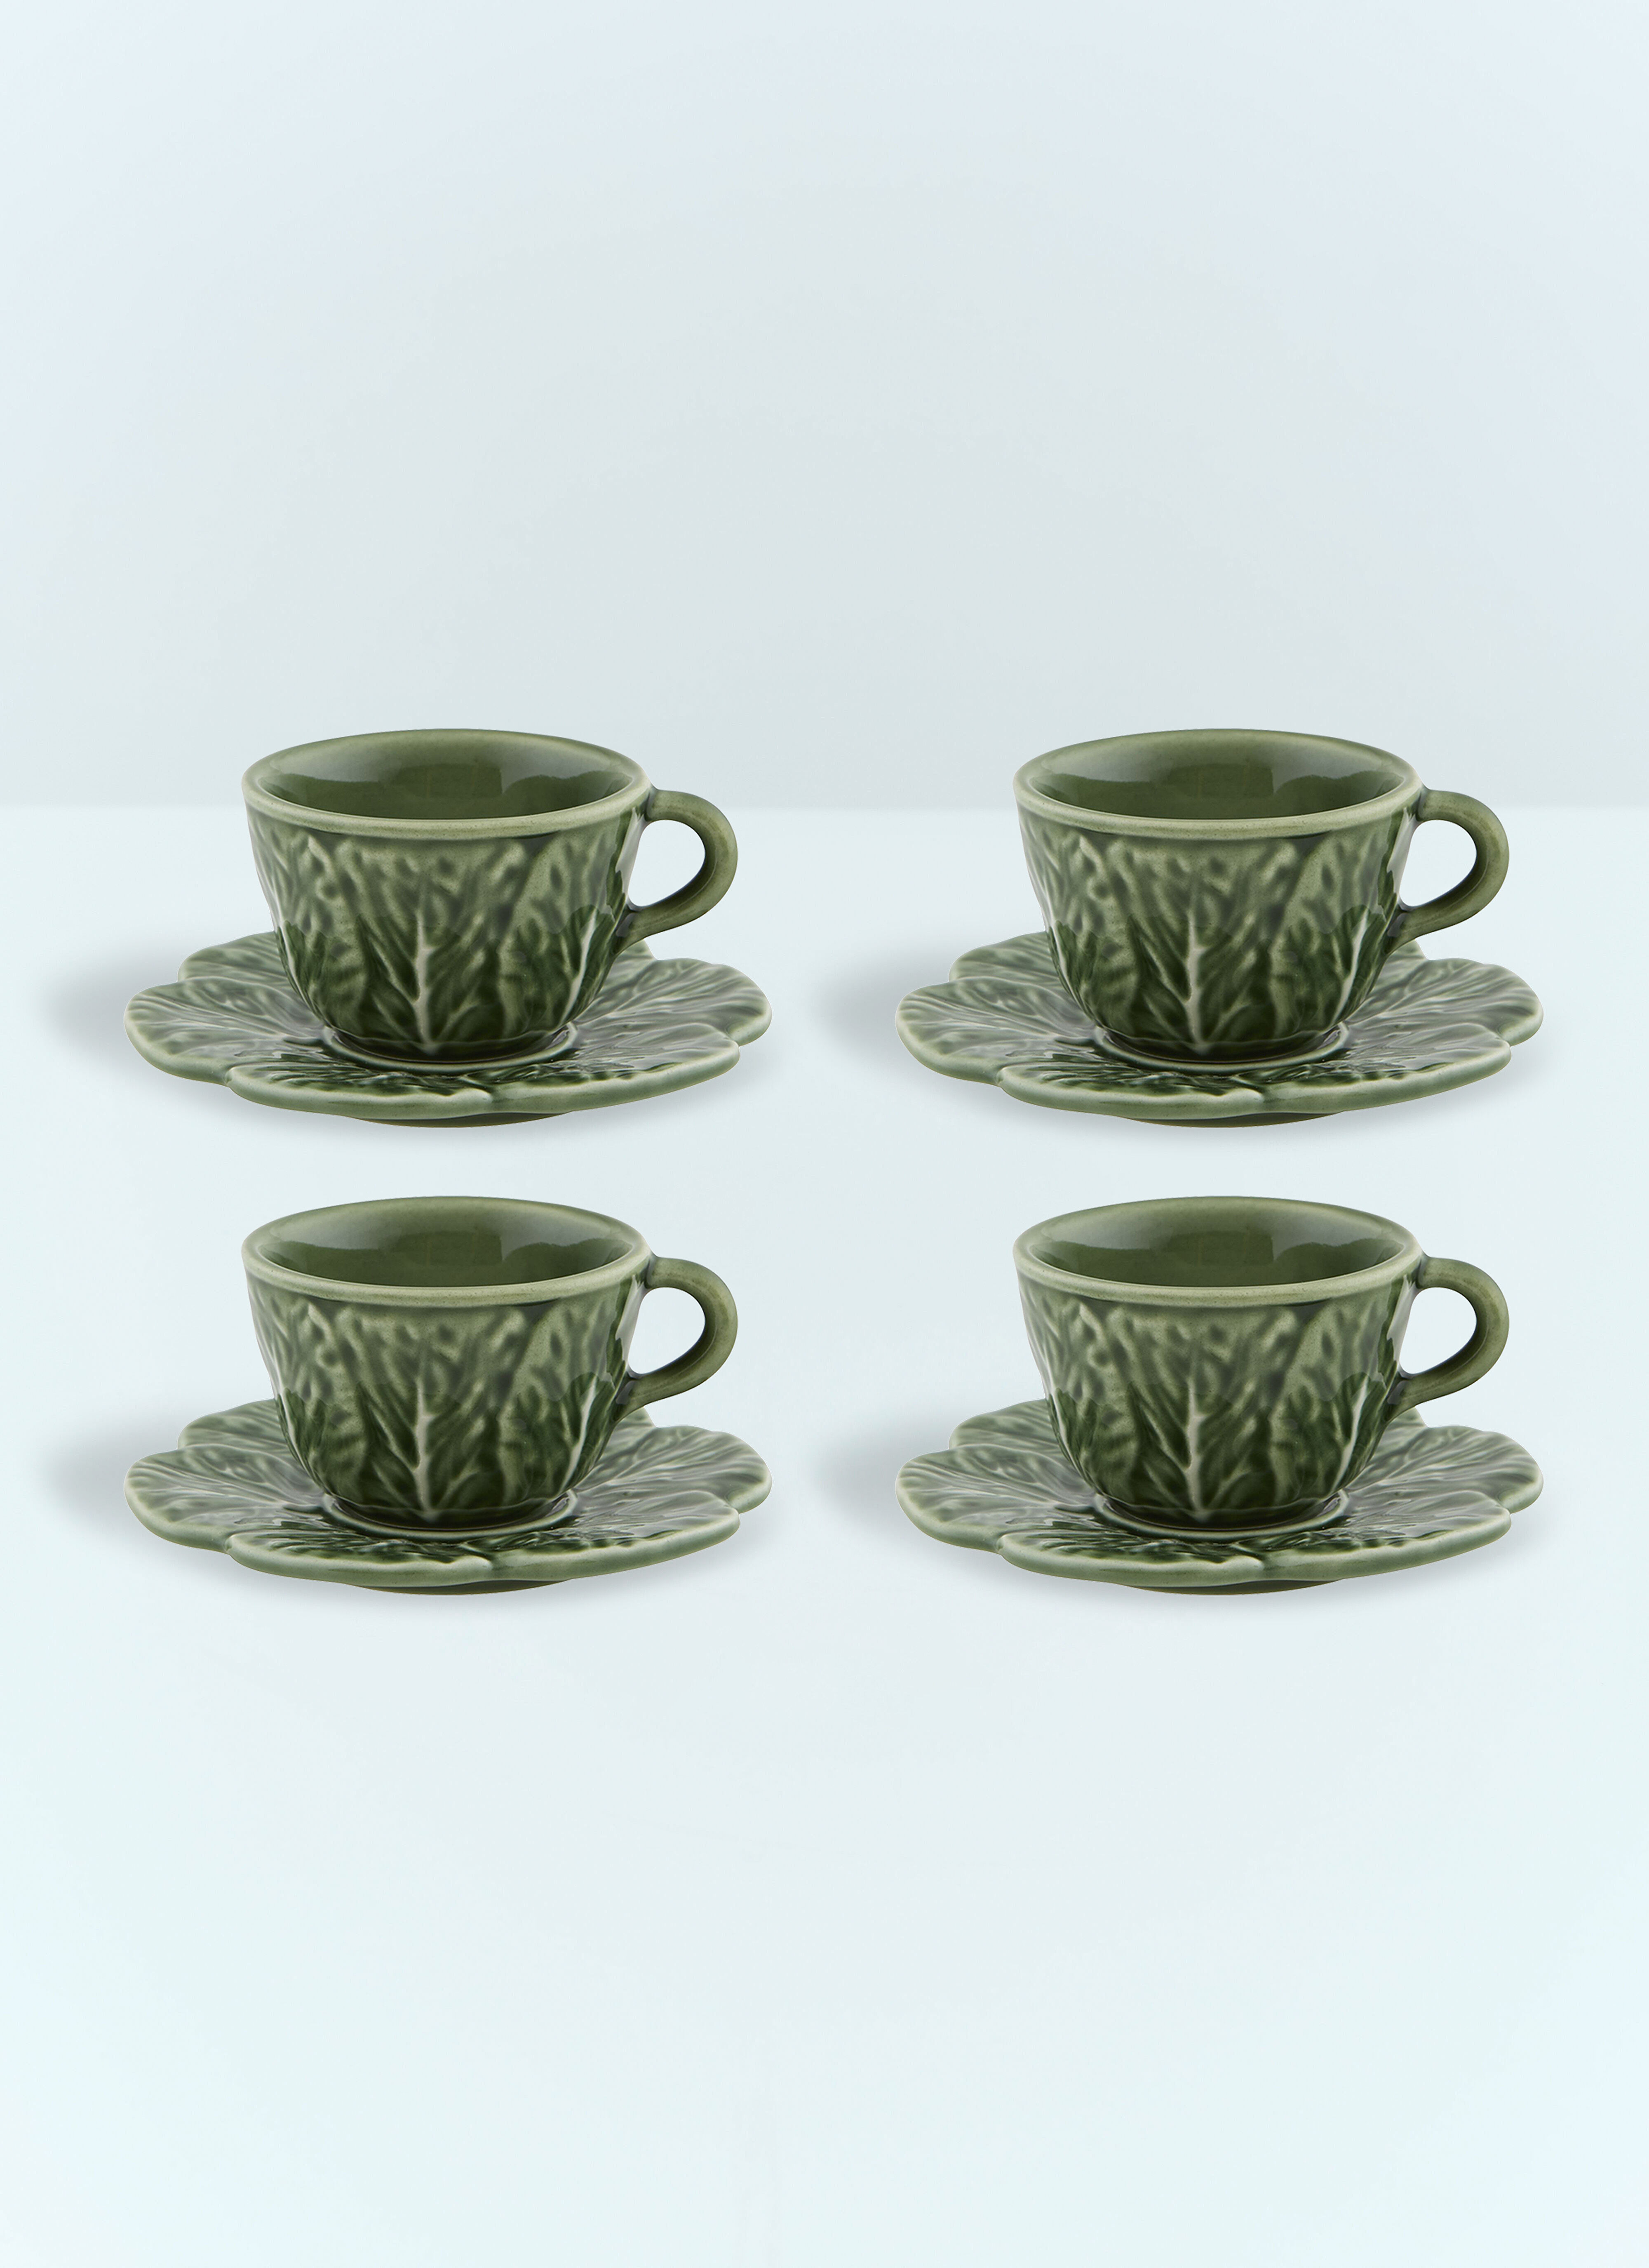 Bordallo Pinheiro Set Of Four Couve Coffee Cups And Saucers Green wps0691190